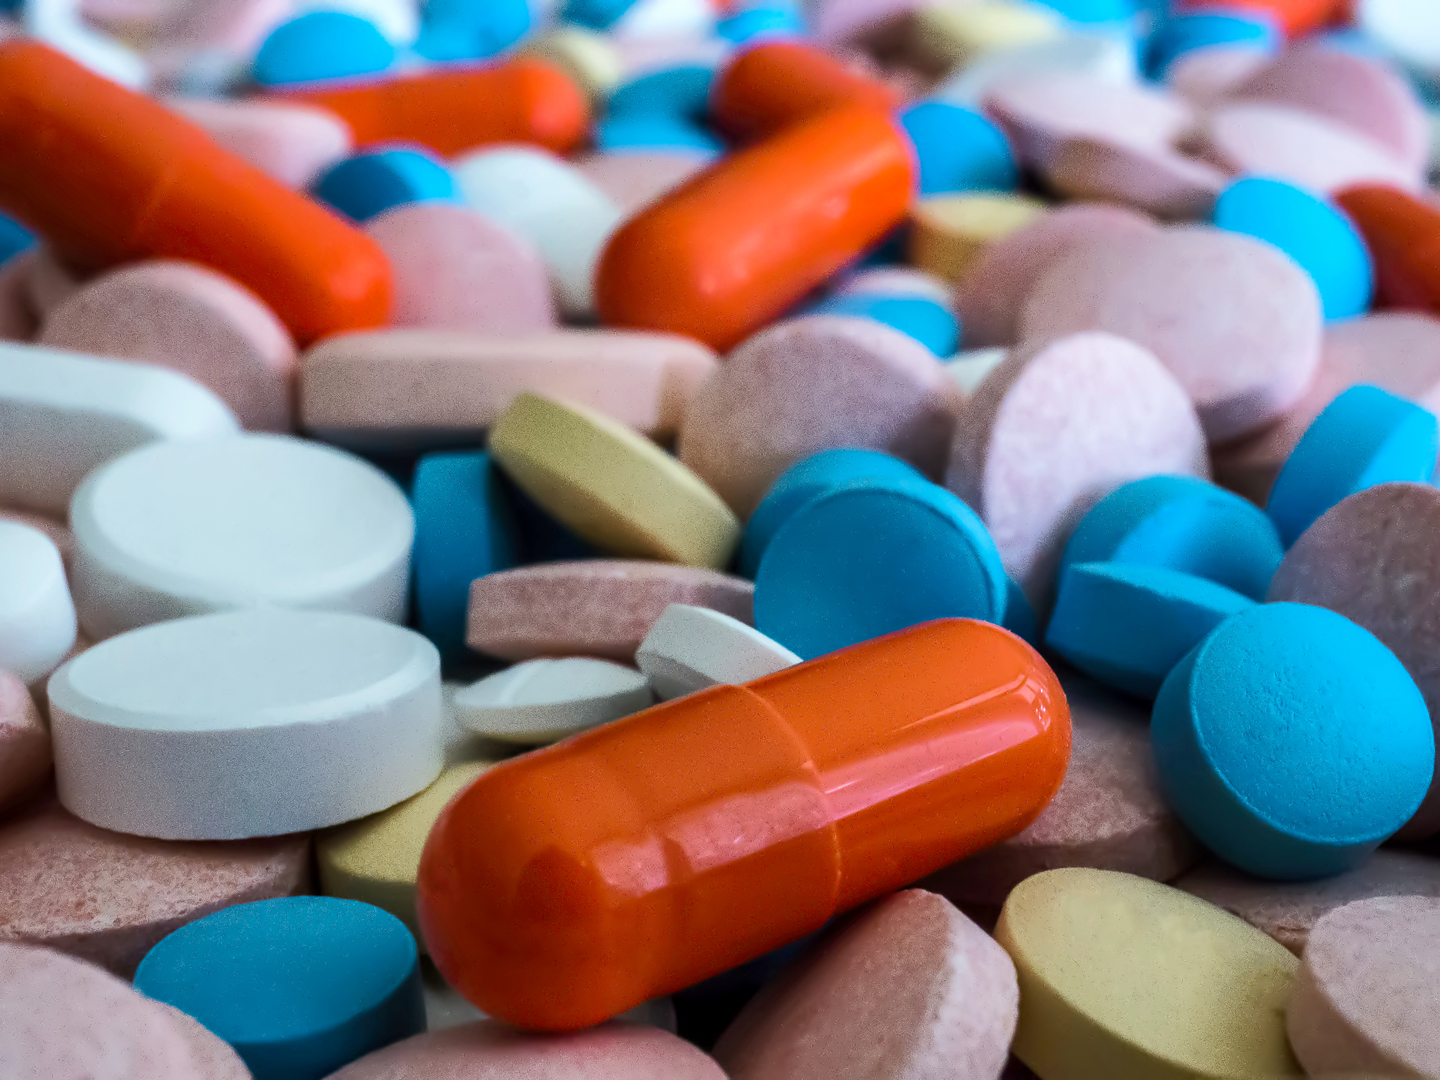 Heap of medicine pills. Close up of colorful tablets and capsules.